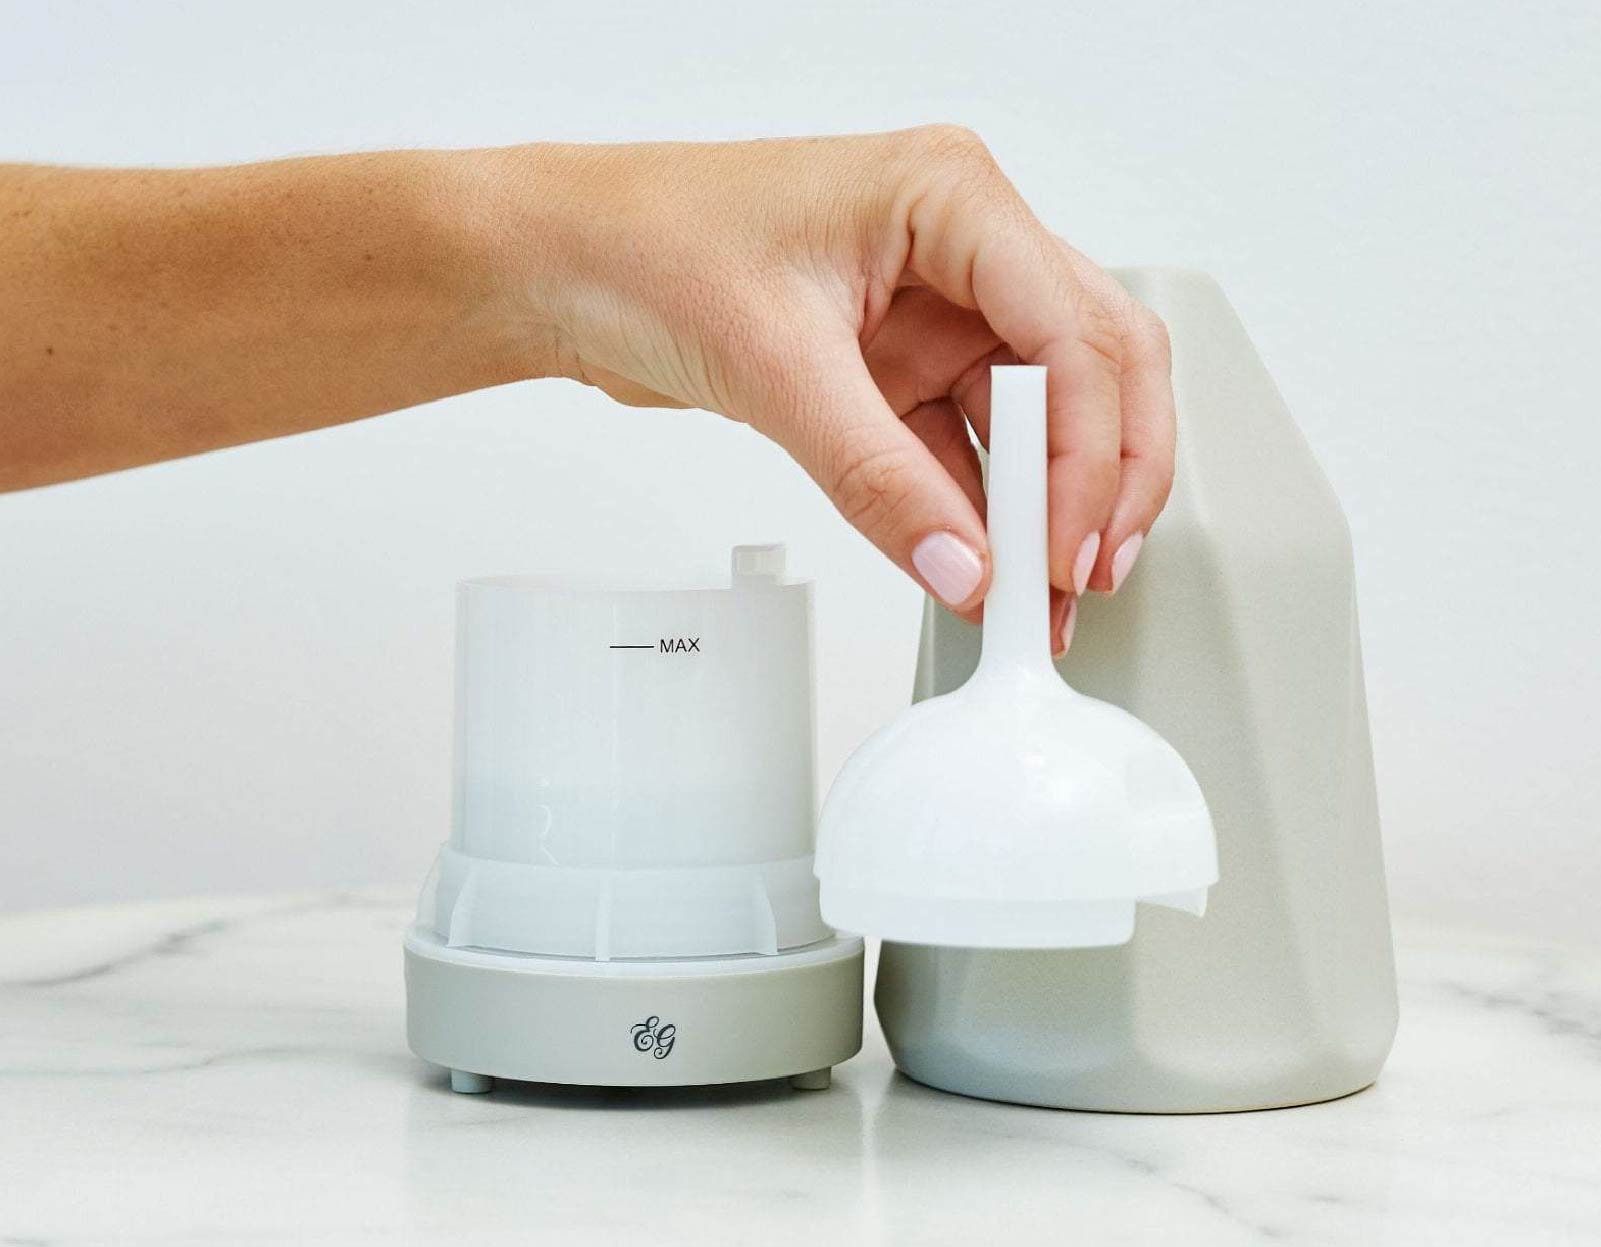 How to clean an essential oil diffuser - Reviewed